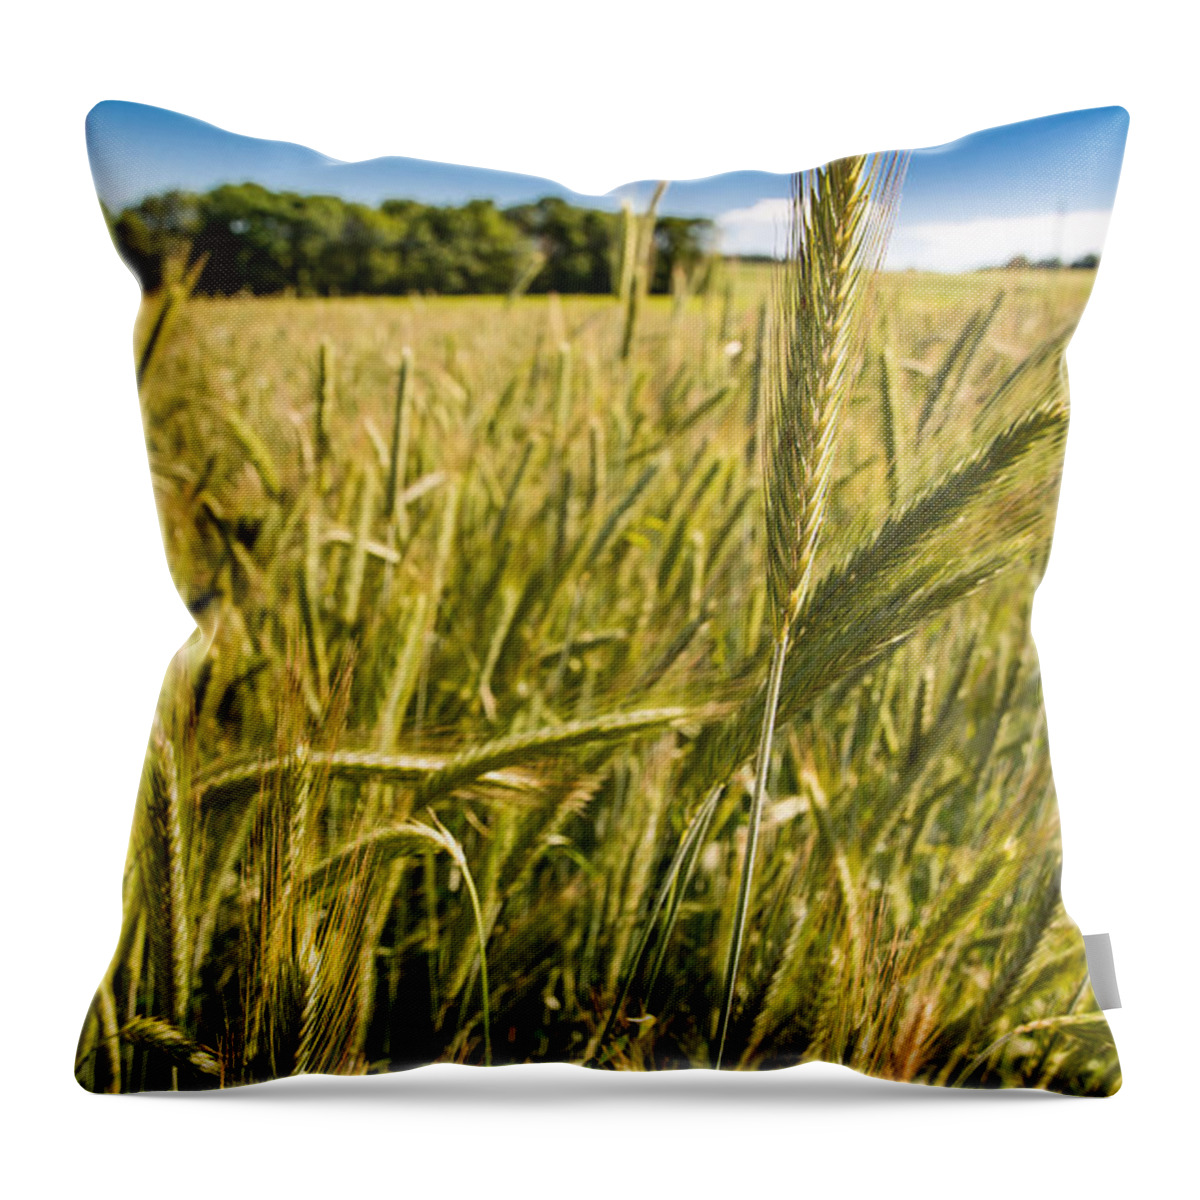 Corn Throw Pillow featuring the photograph Ripe Corn by Andreas Berthold